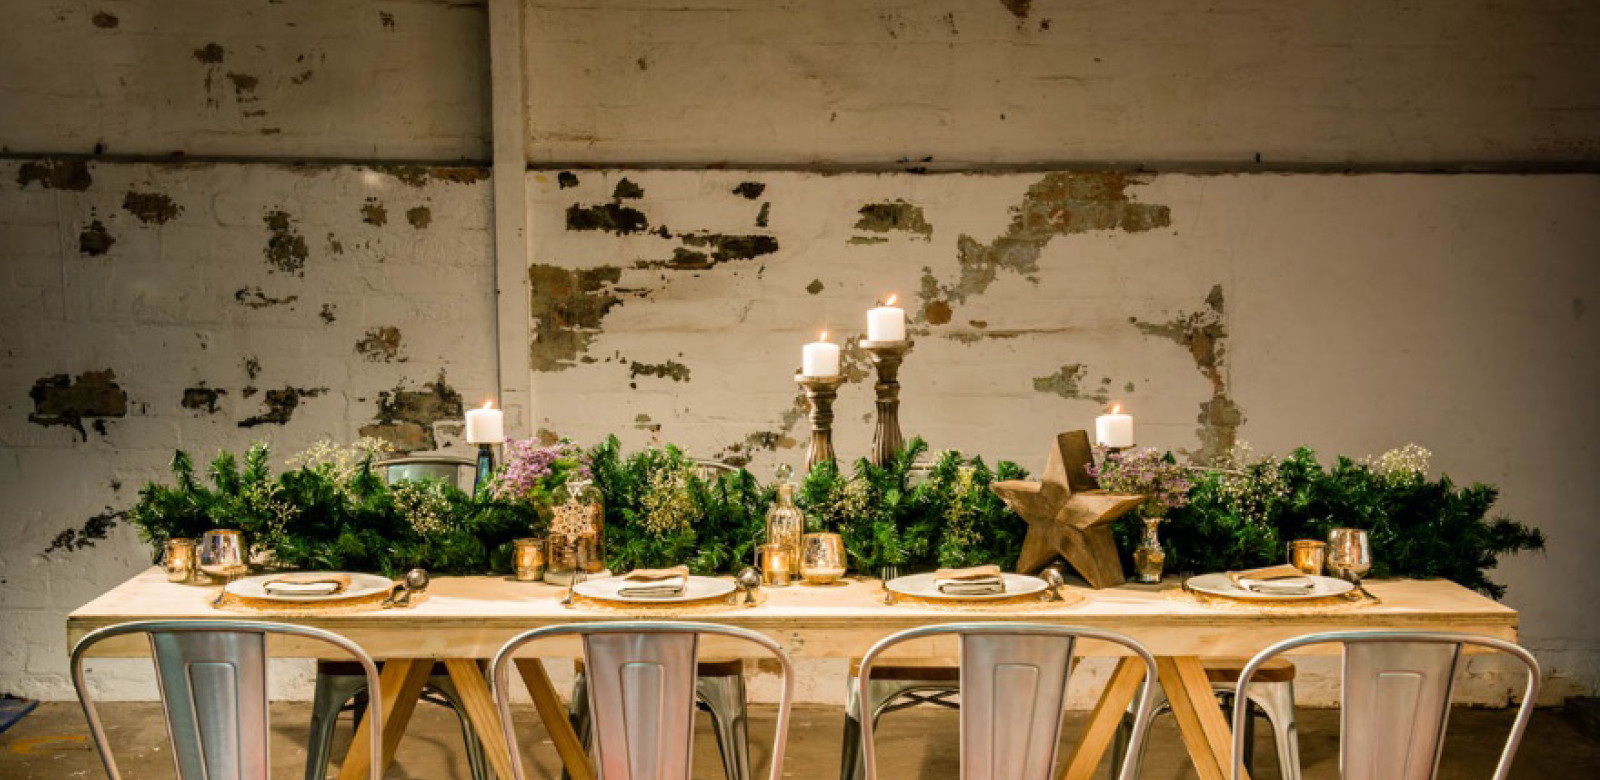 Christmas Party Ideas 2015
 Christmas theme and styling trends for 2015